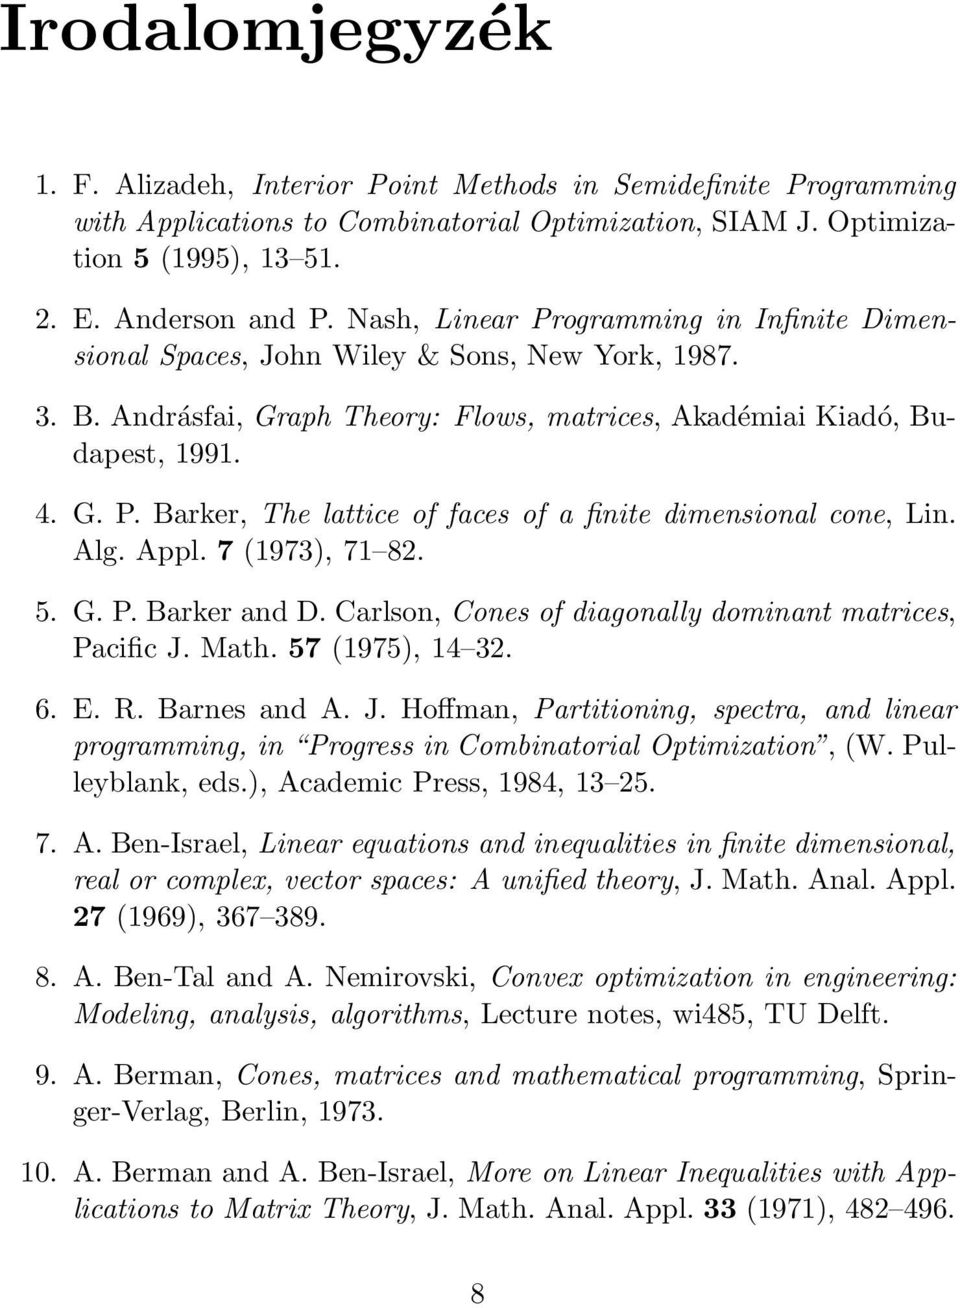 Alg. Appl. 7 (1973), 71 82. 5. G. P. Barker and D. Carlson, Cones of diagonally dominant matrices, Pacific J.